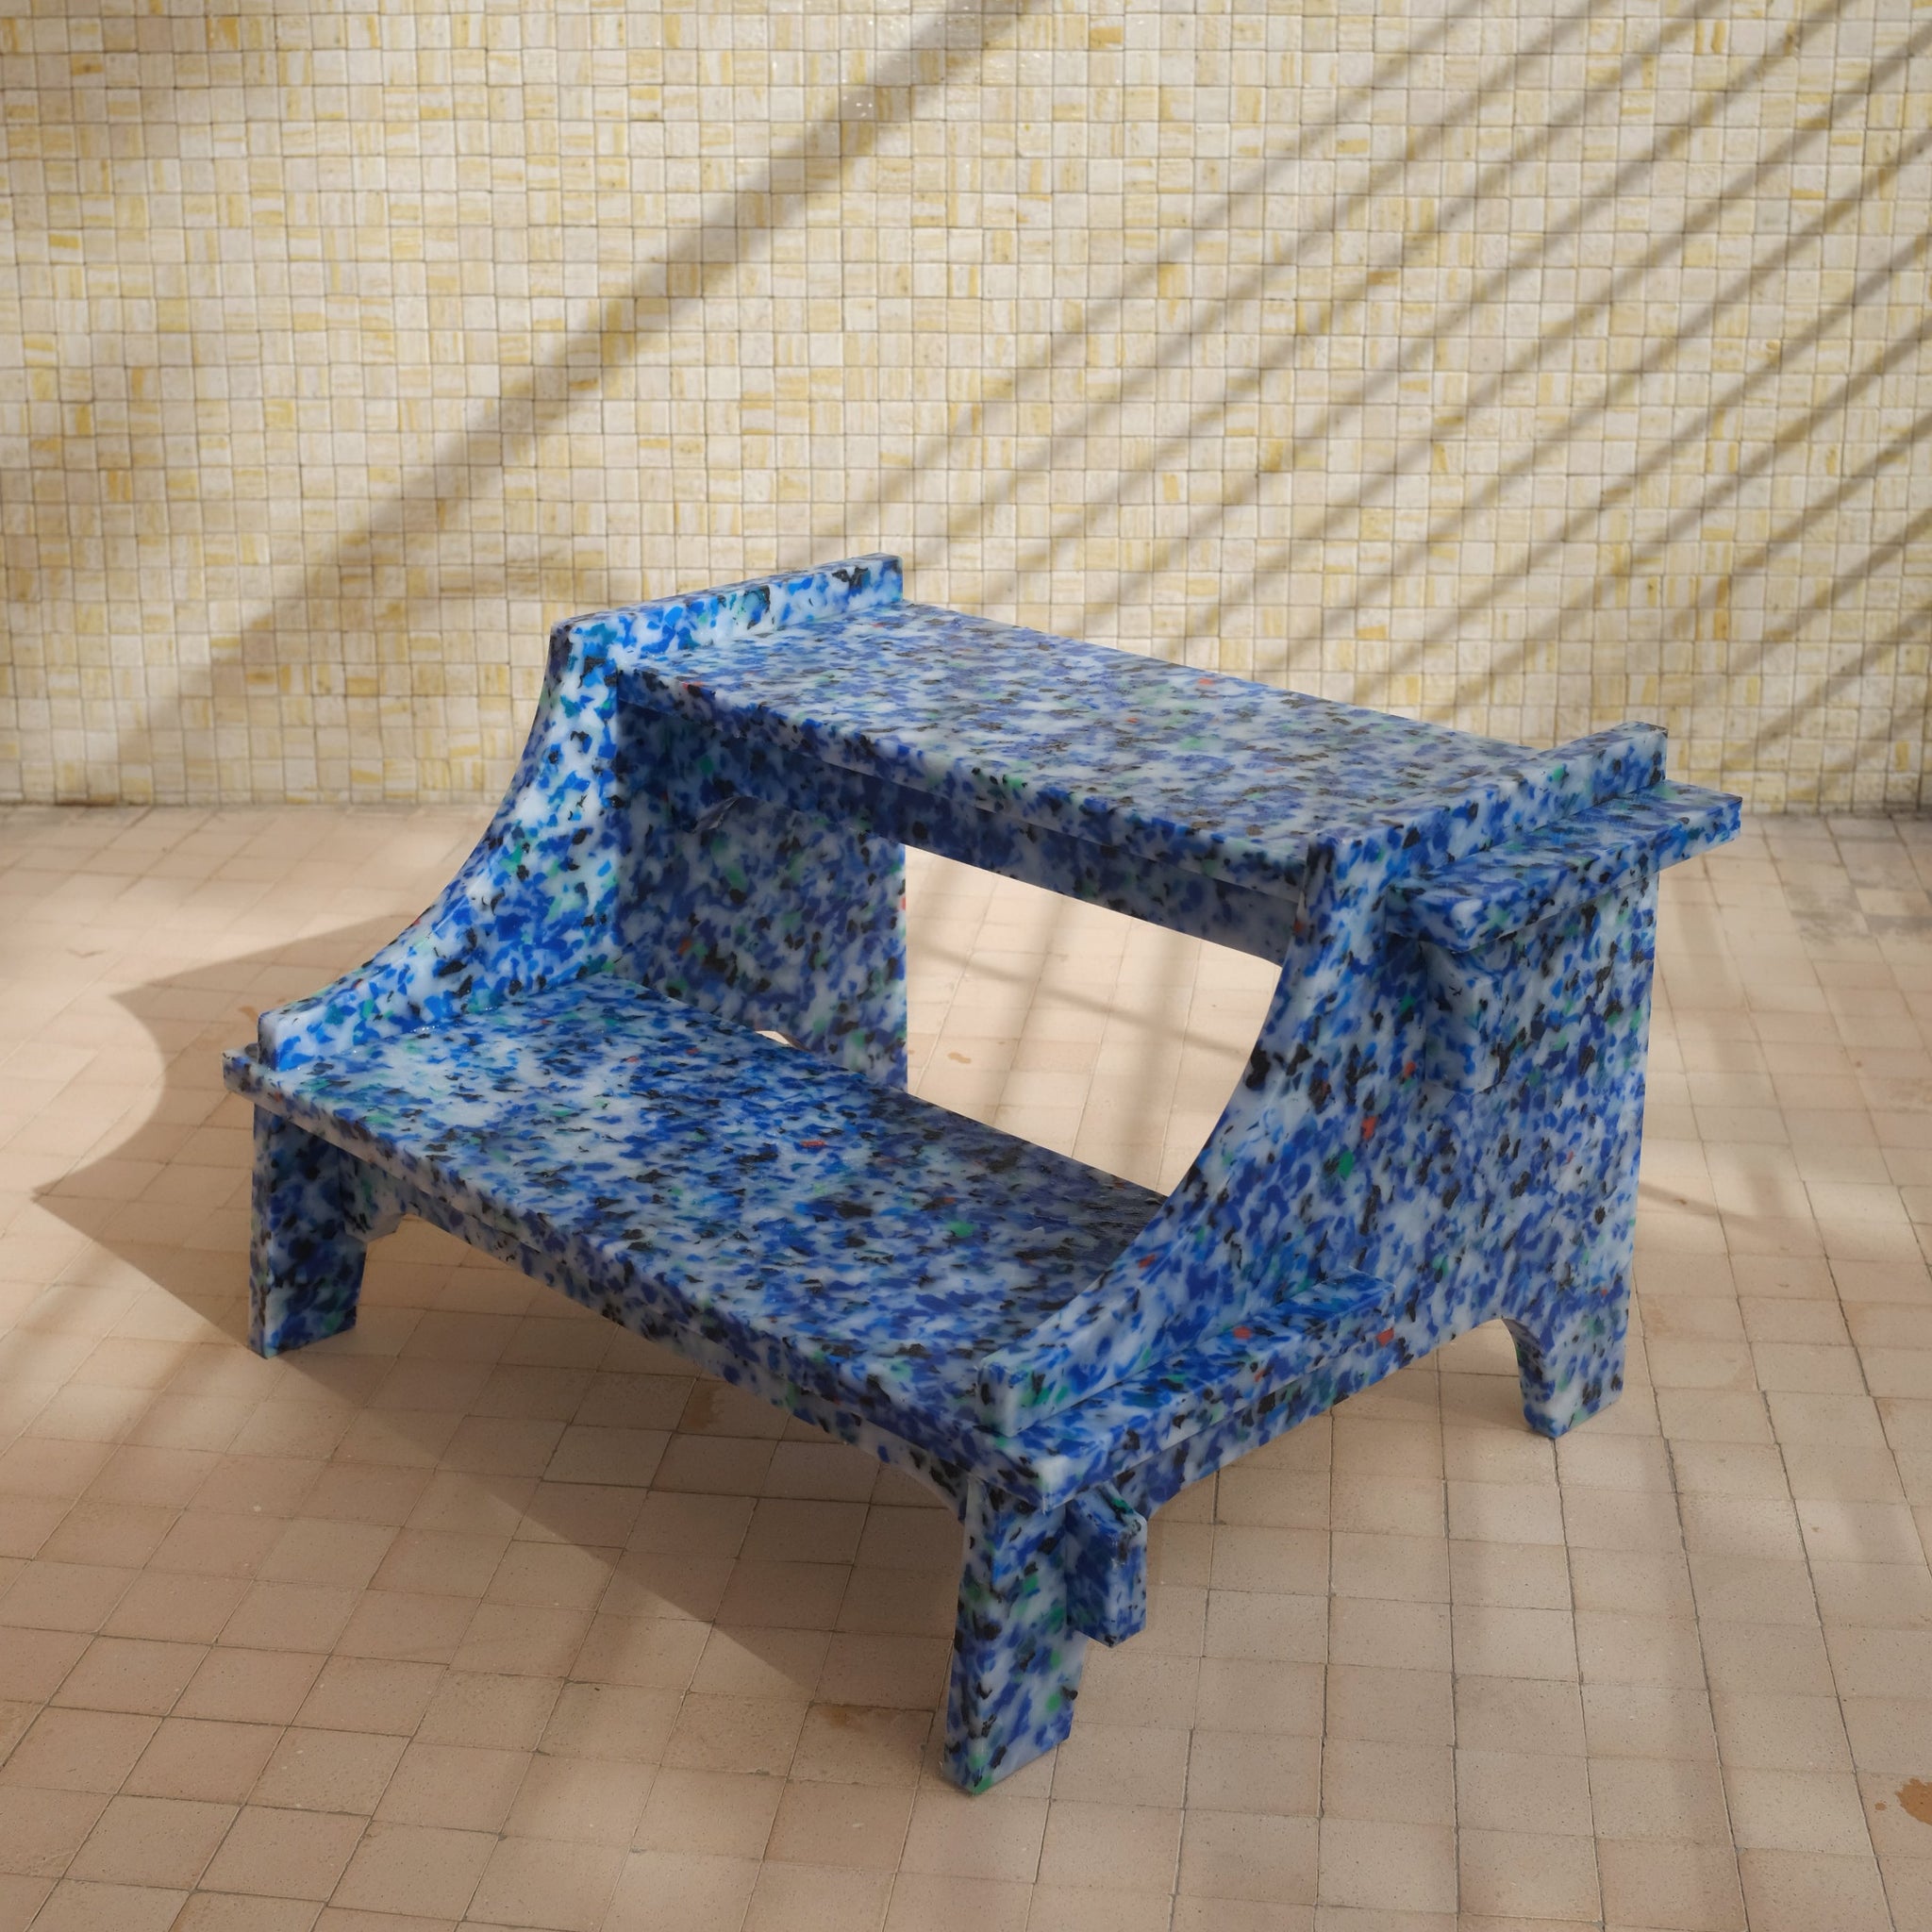 BLUE SMALL STEP STOOL BY THE MINIMONO PROJECT - BRAND FOR ECO FRIENDLY - PLAYFUL - MULTI FUNCTIONAL - SUSTAINABLE - HIGH QUALITY - DESIGN FURNITURE FROM RECYCLED PLASTIC FOR BOTH ADULT AND CHILDREN MADE IN BERLIN GERMANY